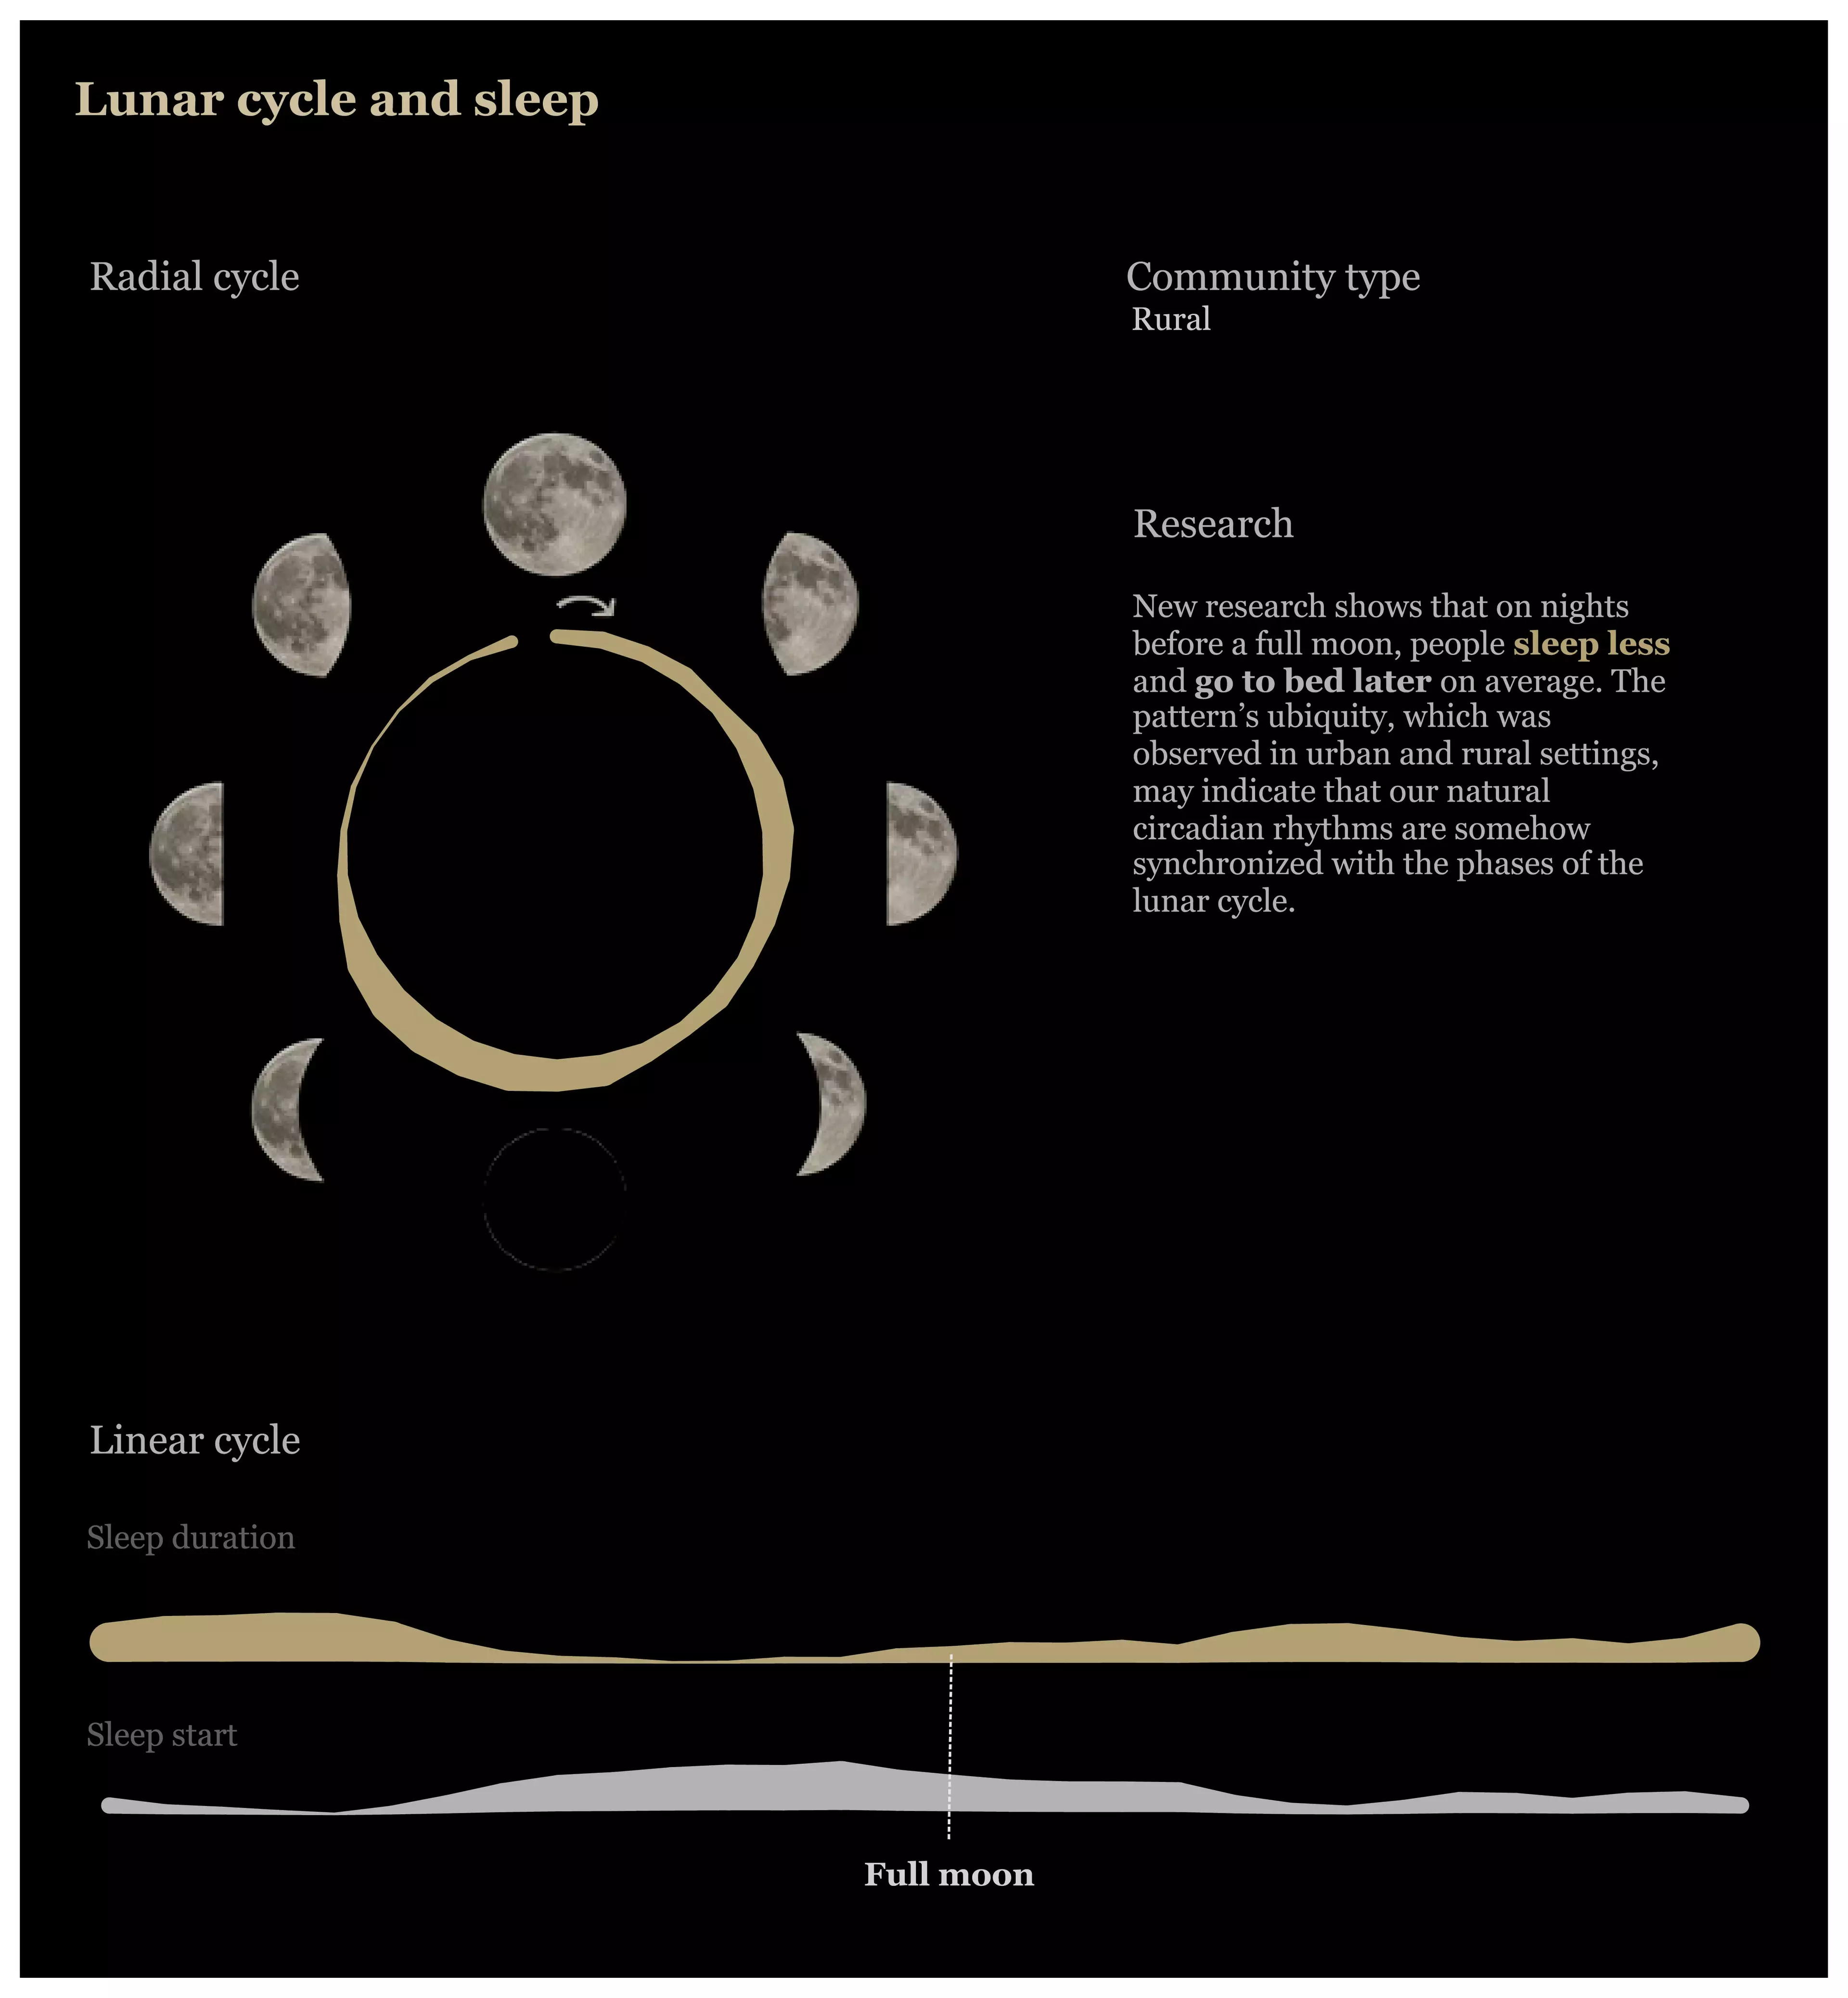 The lunar cycle (